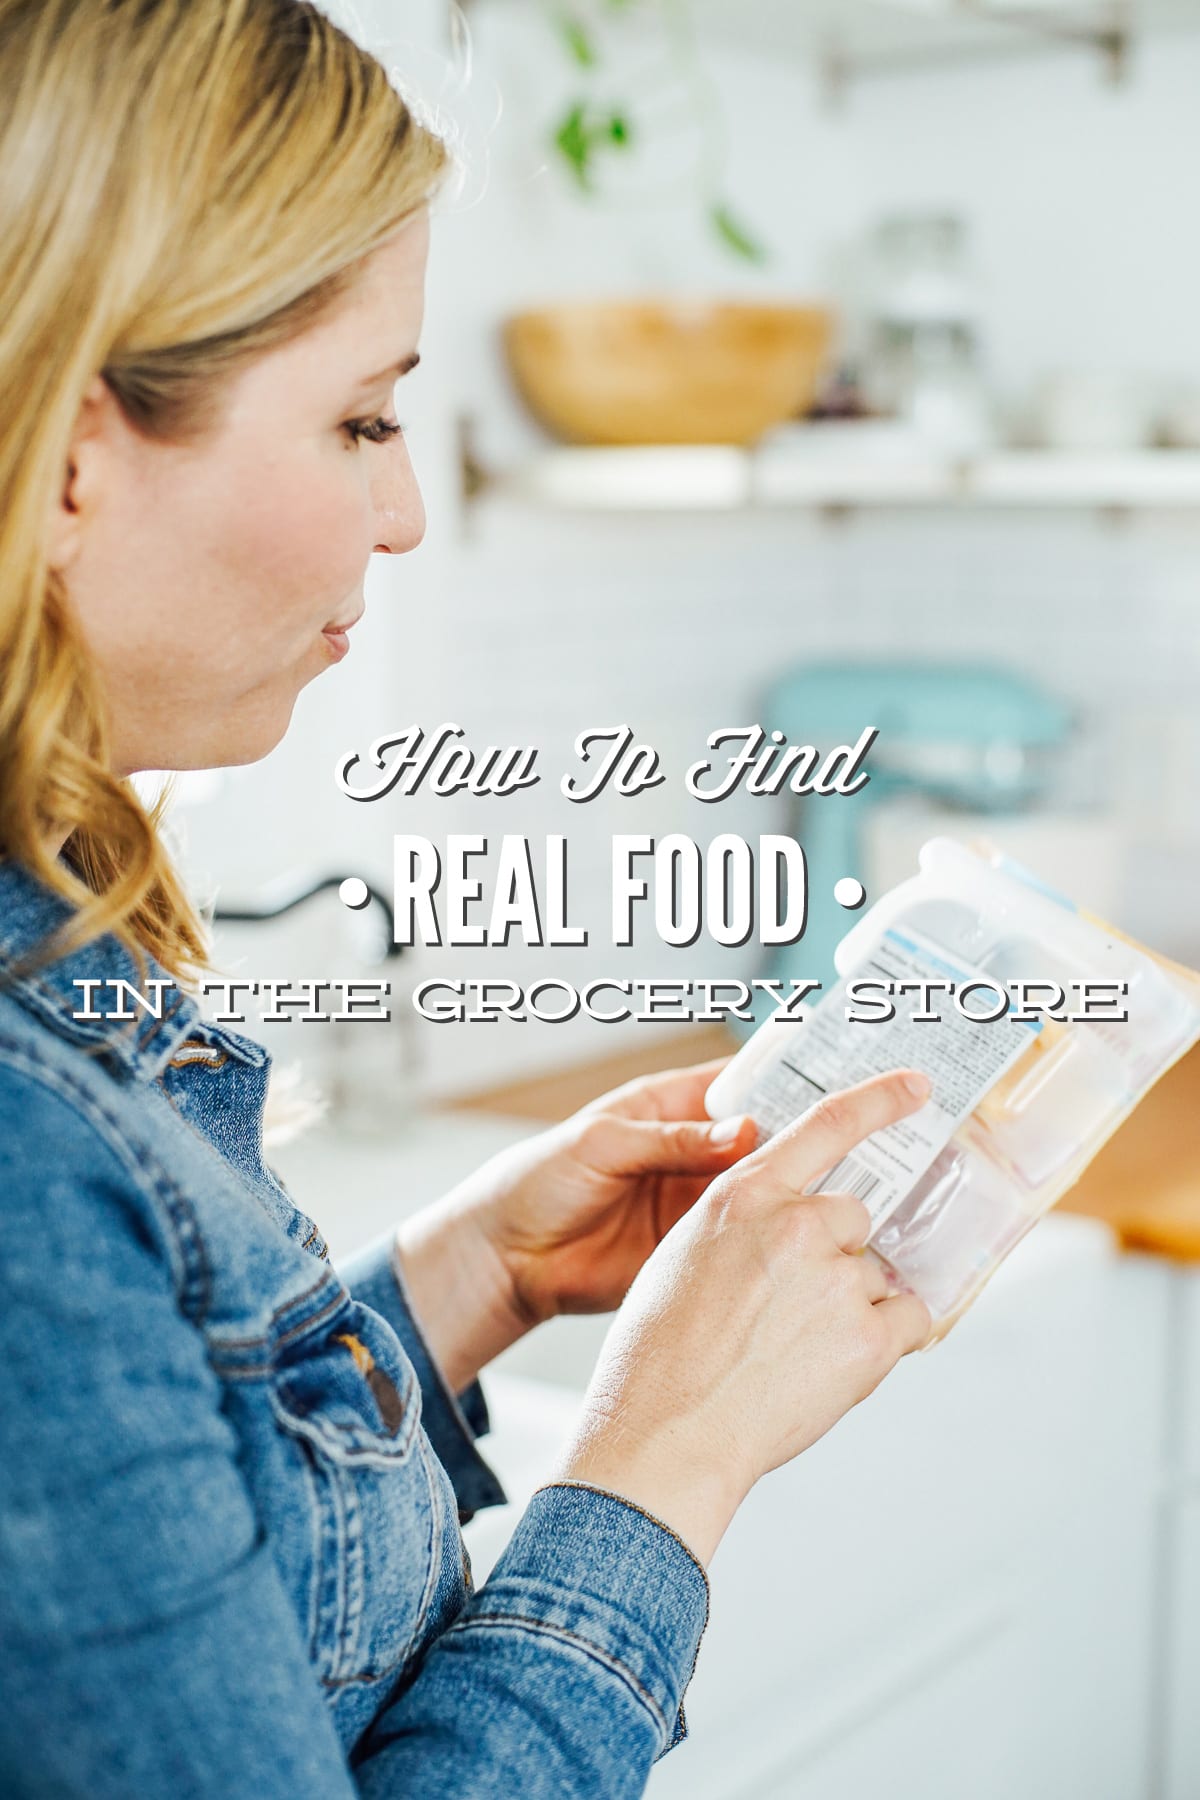 How to Read Ingredient Lists (and Find Real Food)